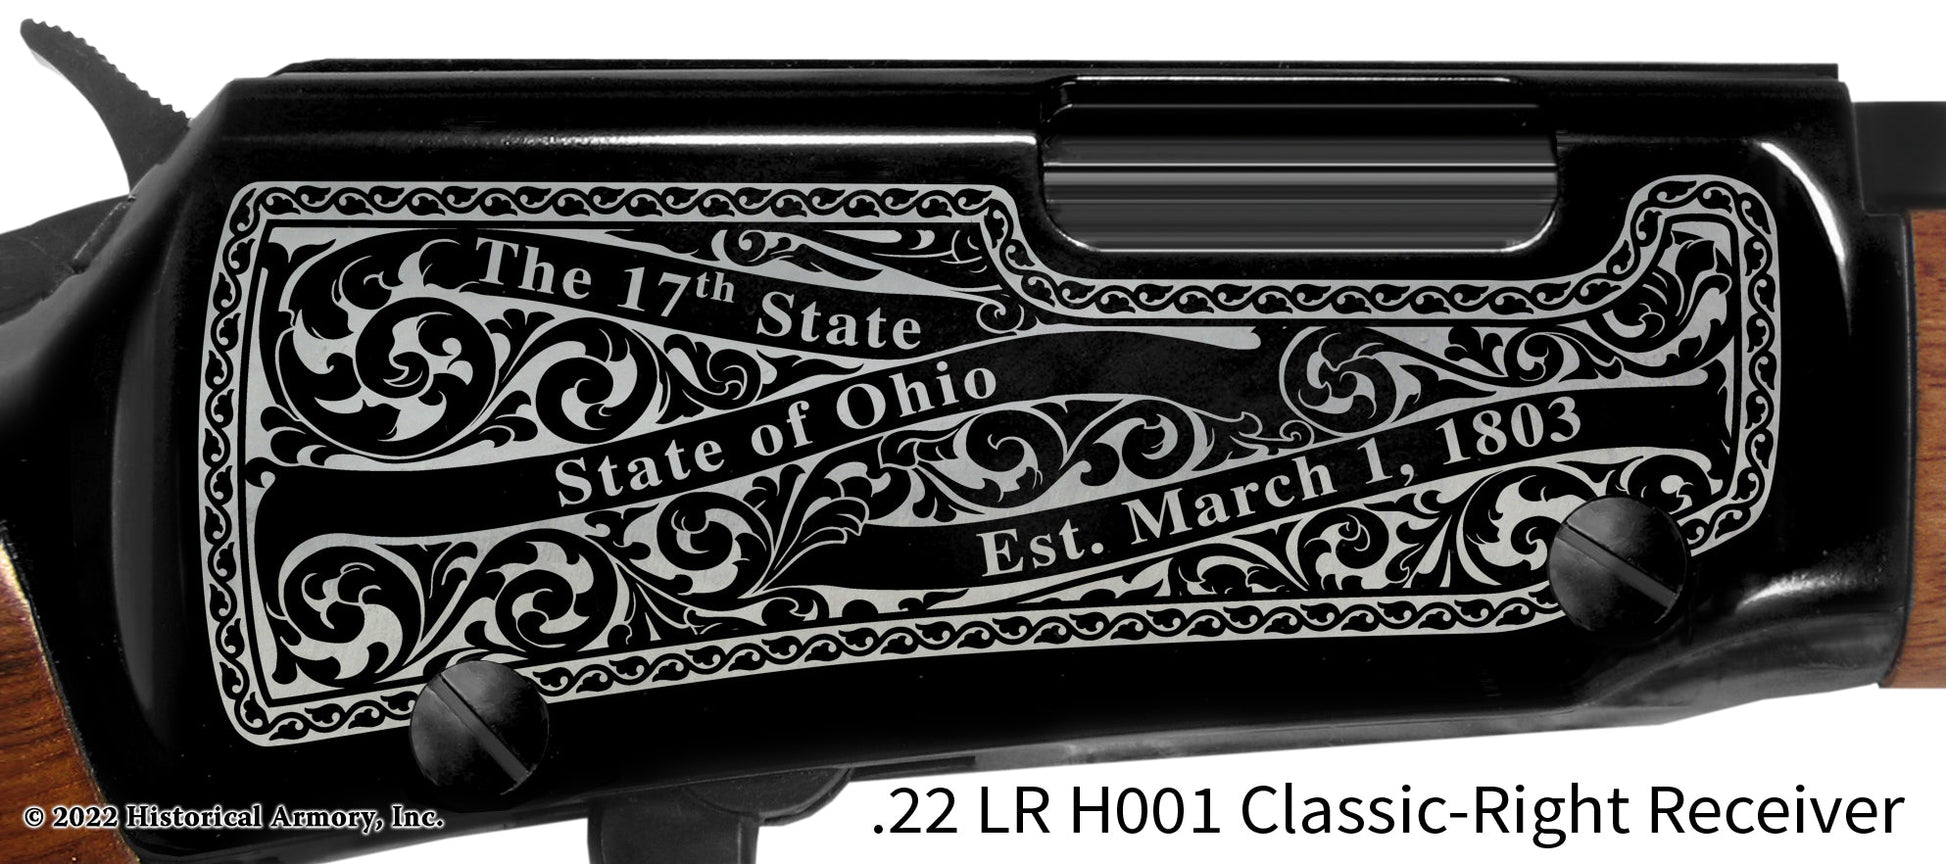 Belmont County Ohio Engraved Henry H001 Rifle